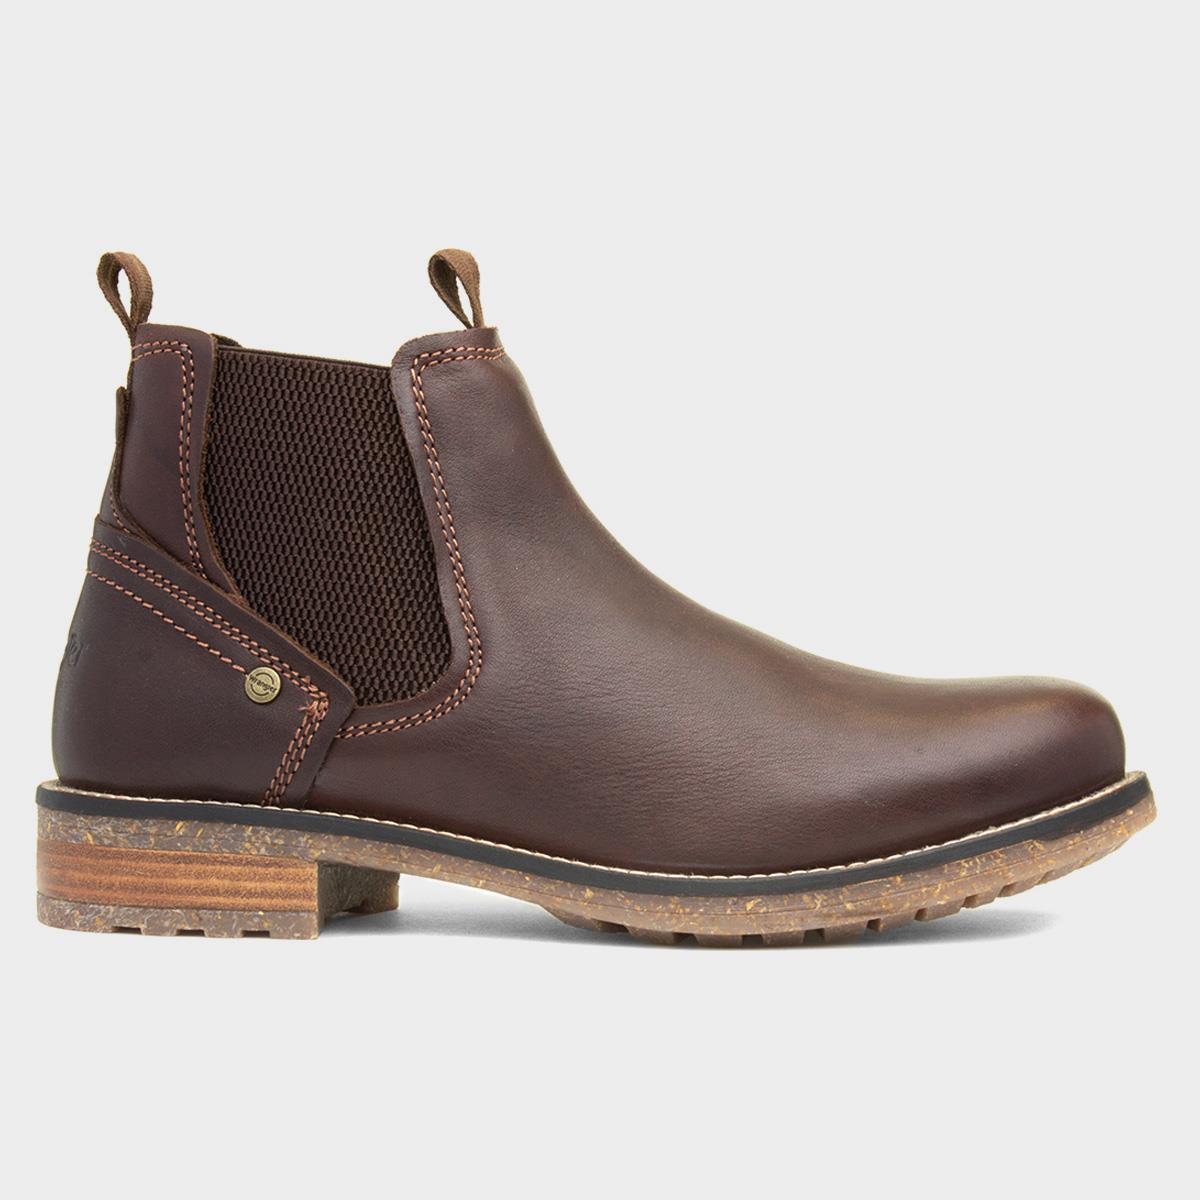 Wrangler Hill Mens Brown Leather Chelsea Boot-58683 | Shoe Zone